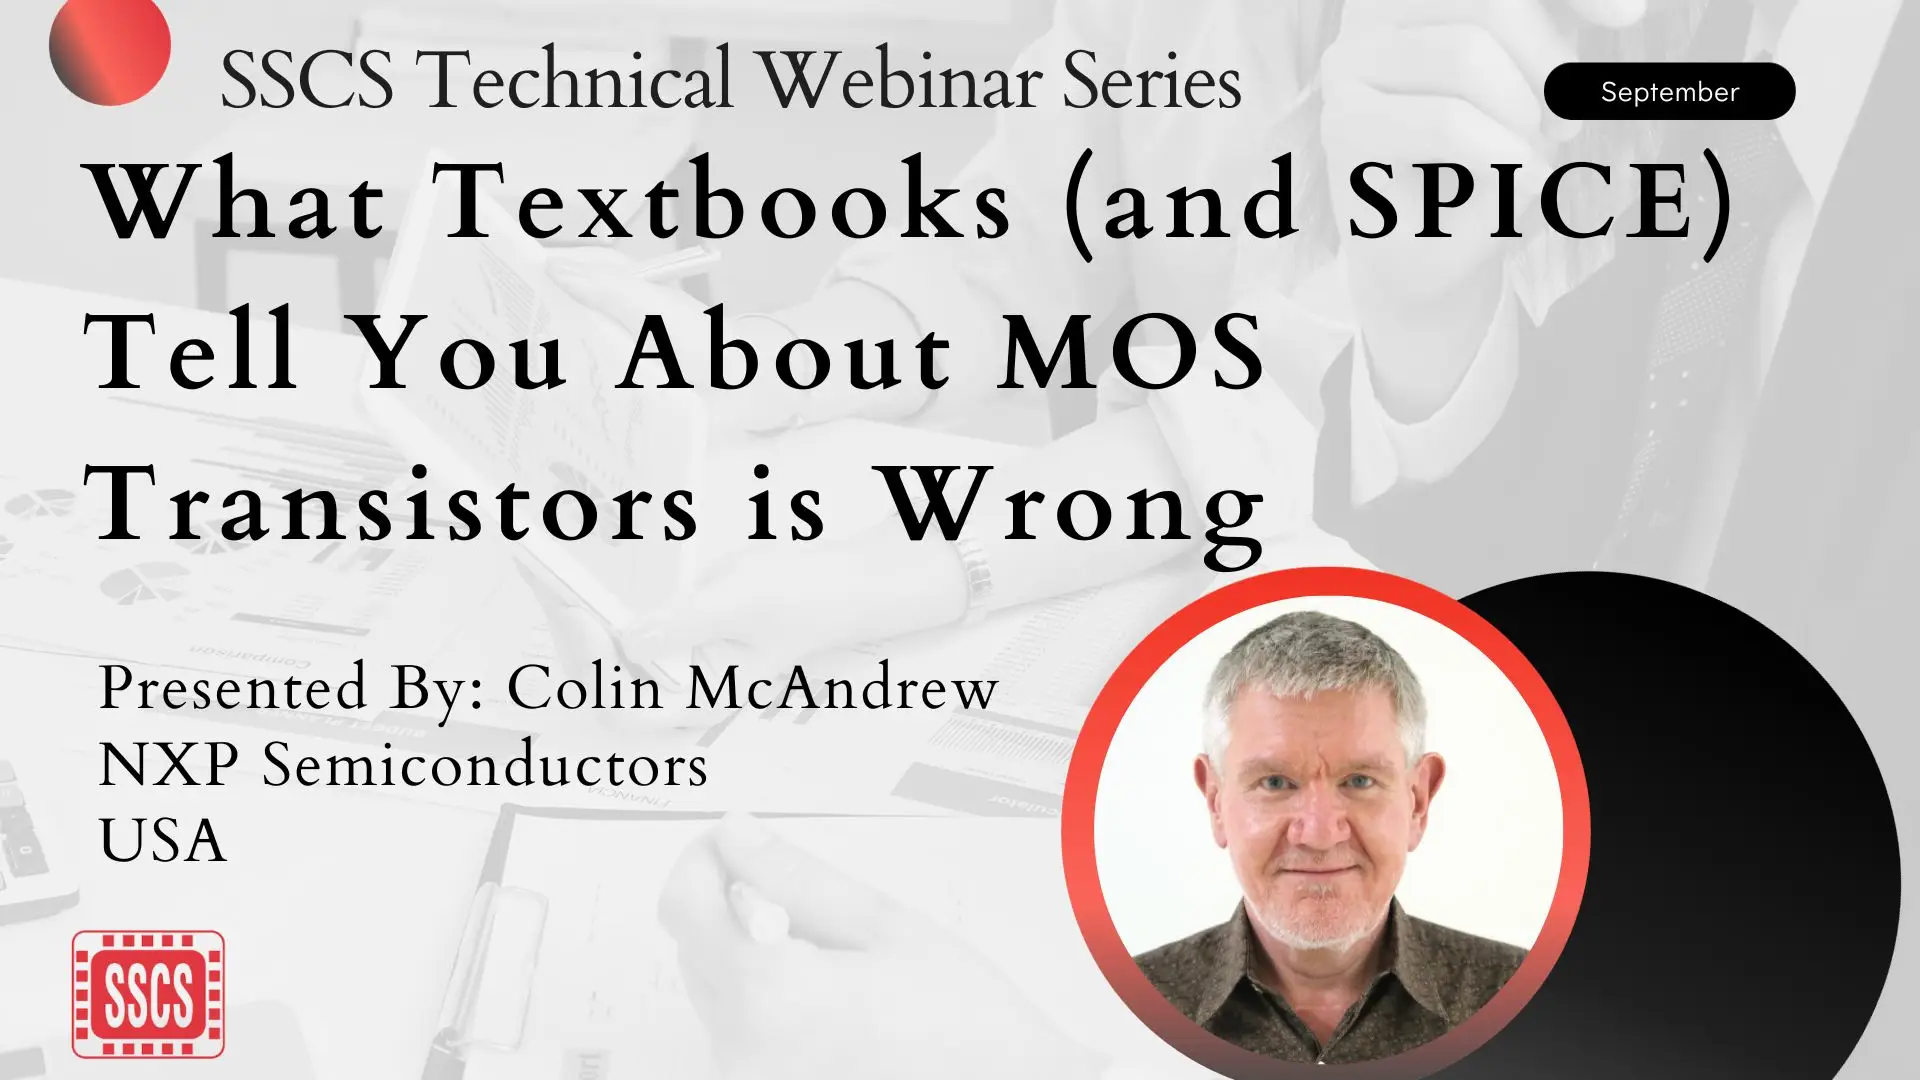 What Textbooks (and SPICE) Tell You About MOS Transistors is Wrong Video